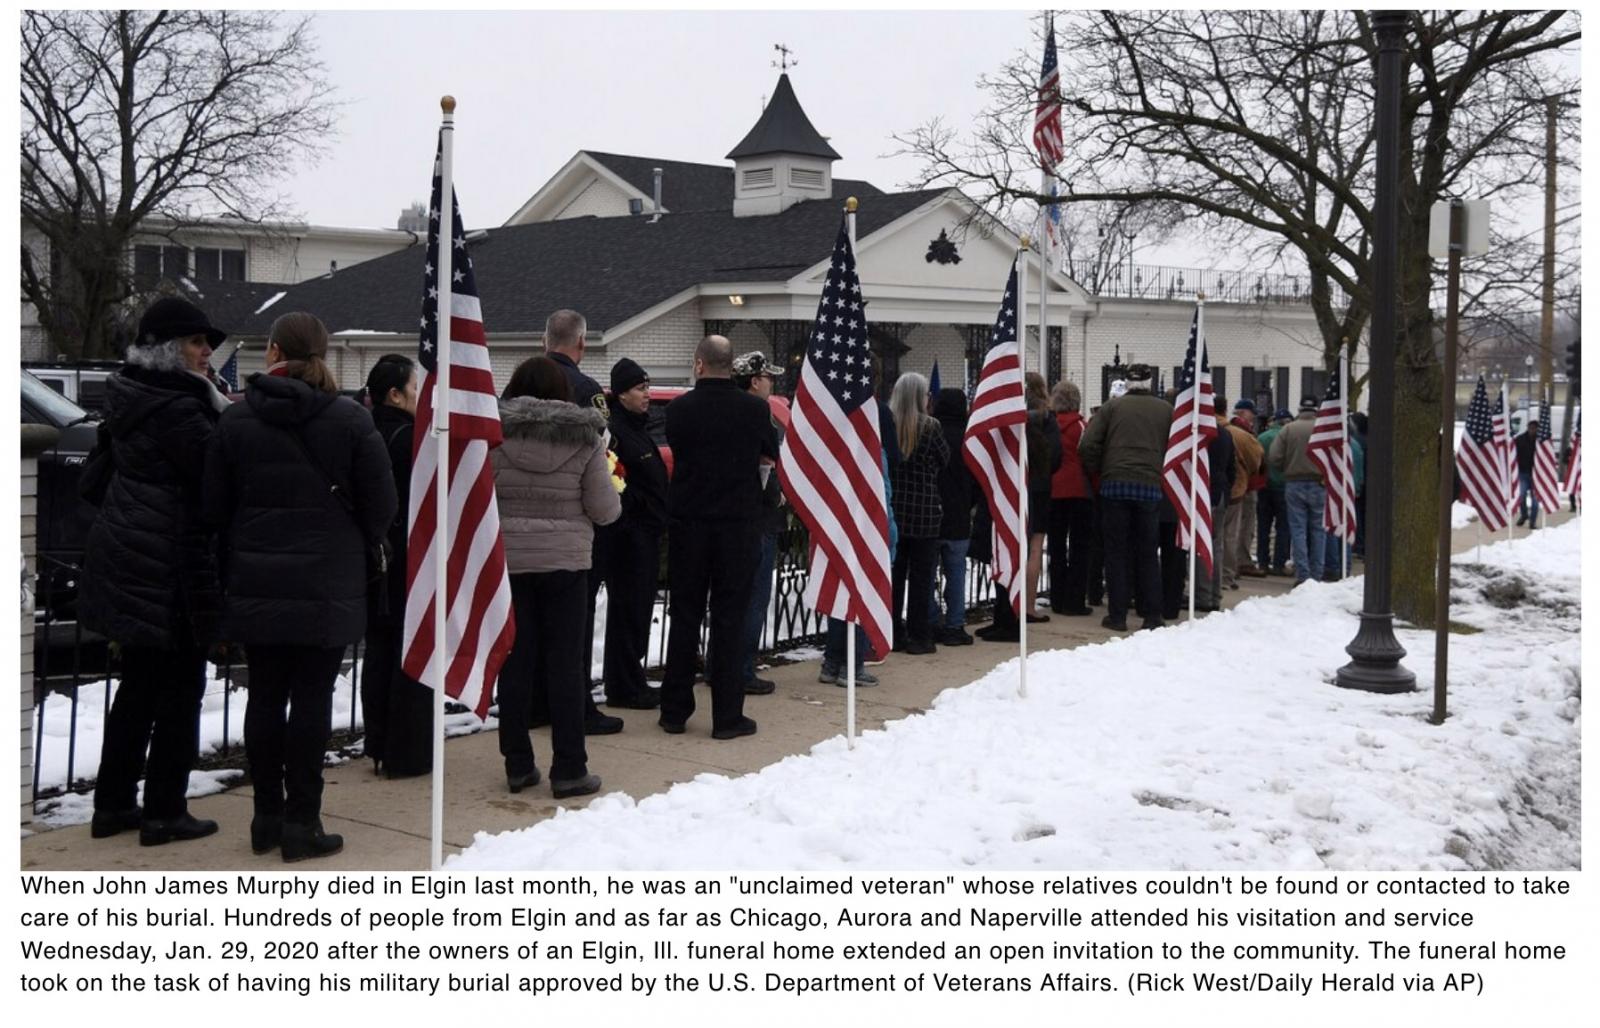  Hundreds attend Illinois funeral for Air Force veteran with no known relatives